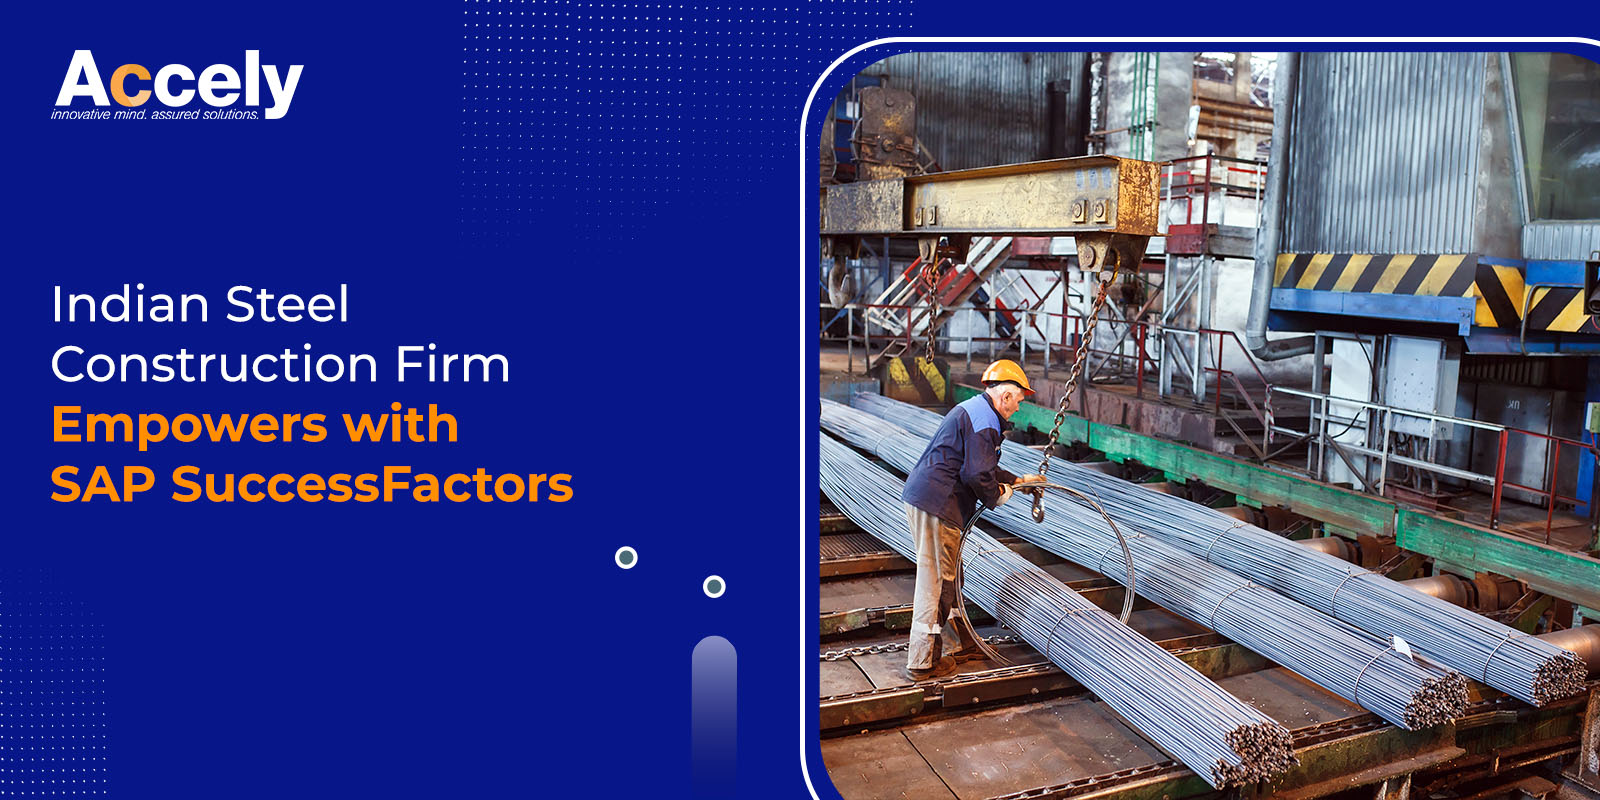 Indian Steel Construction Firm Empowers with SAP SuccessFactors